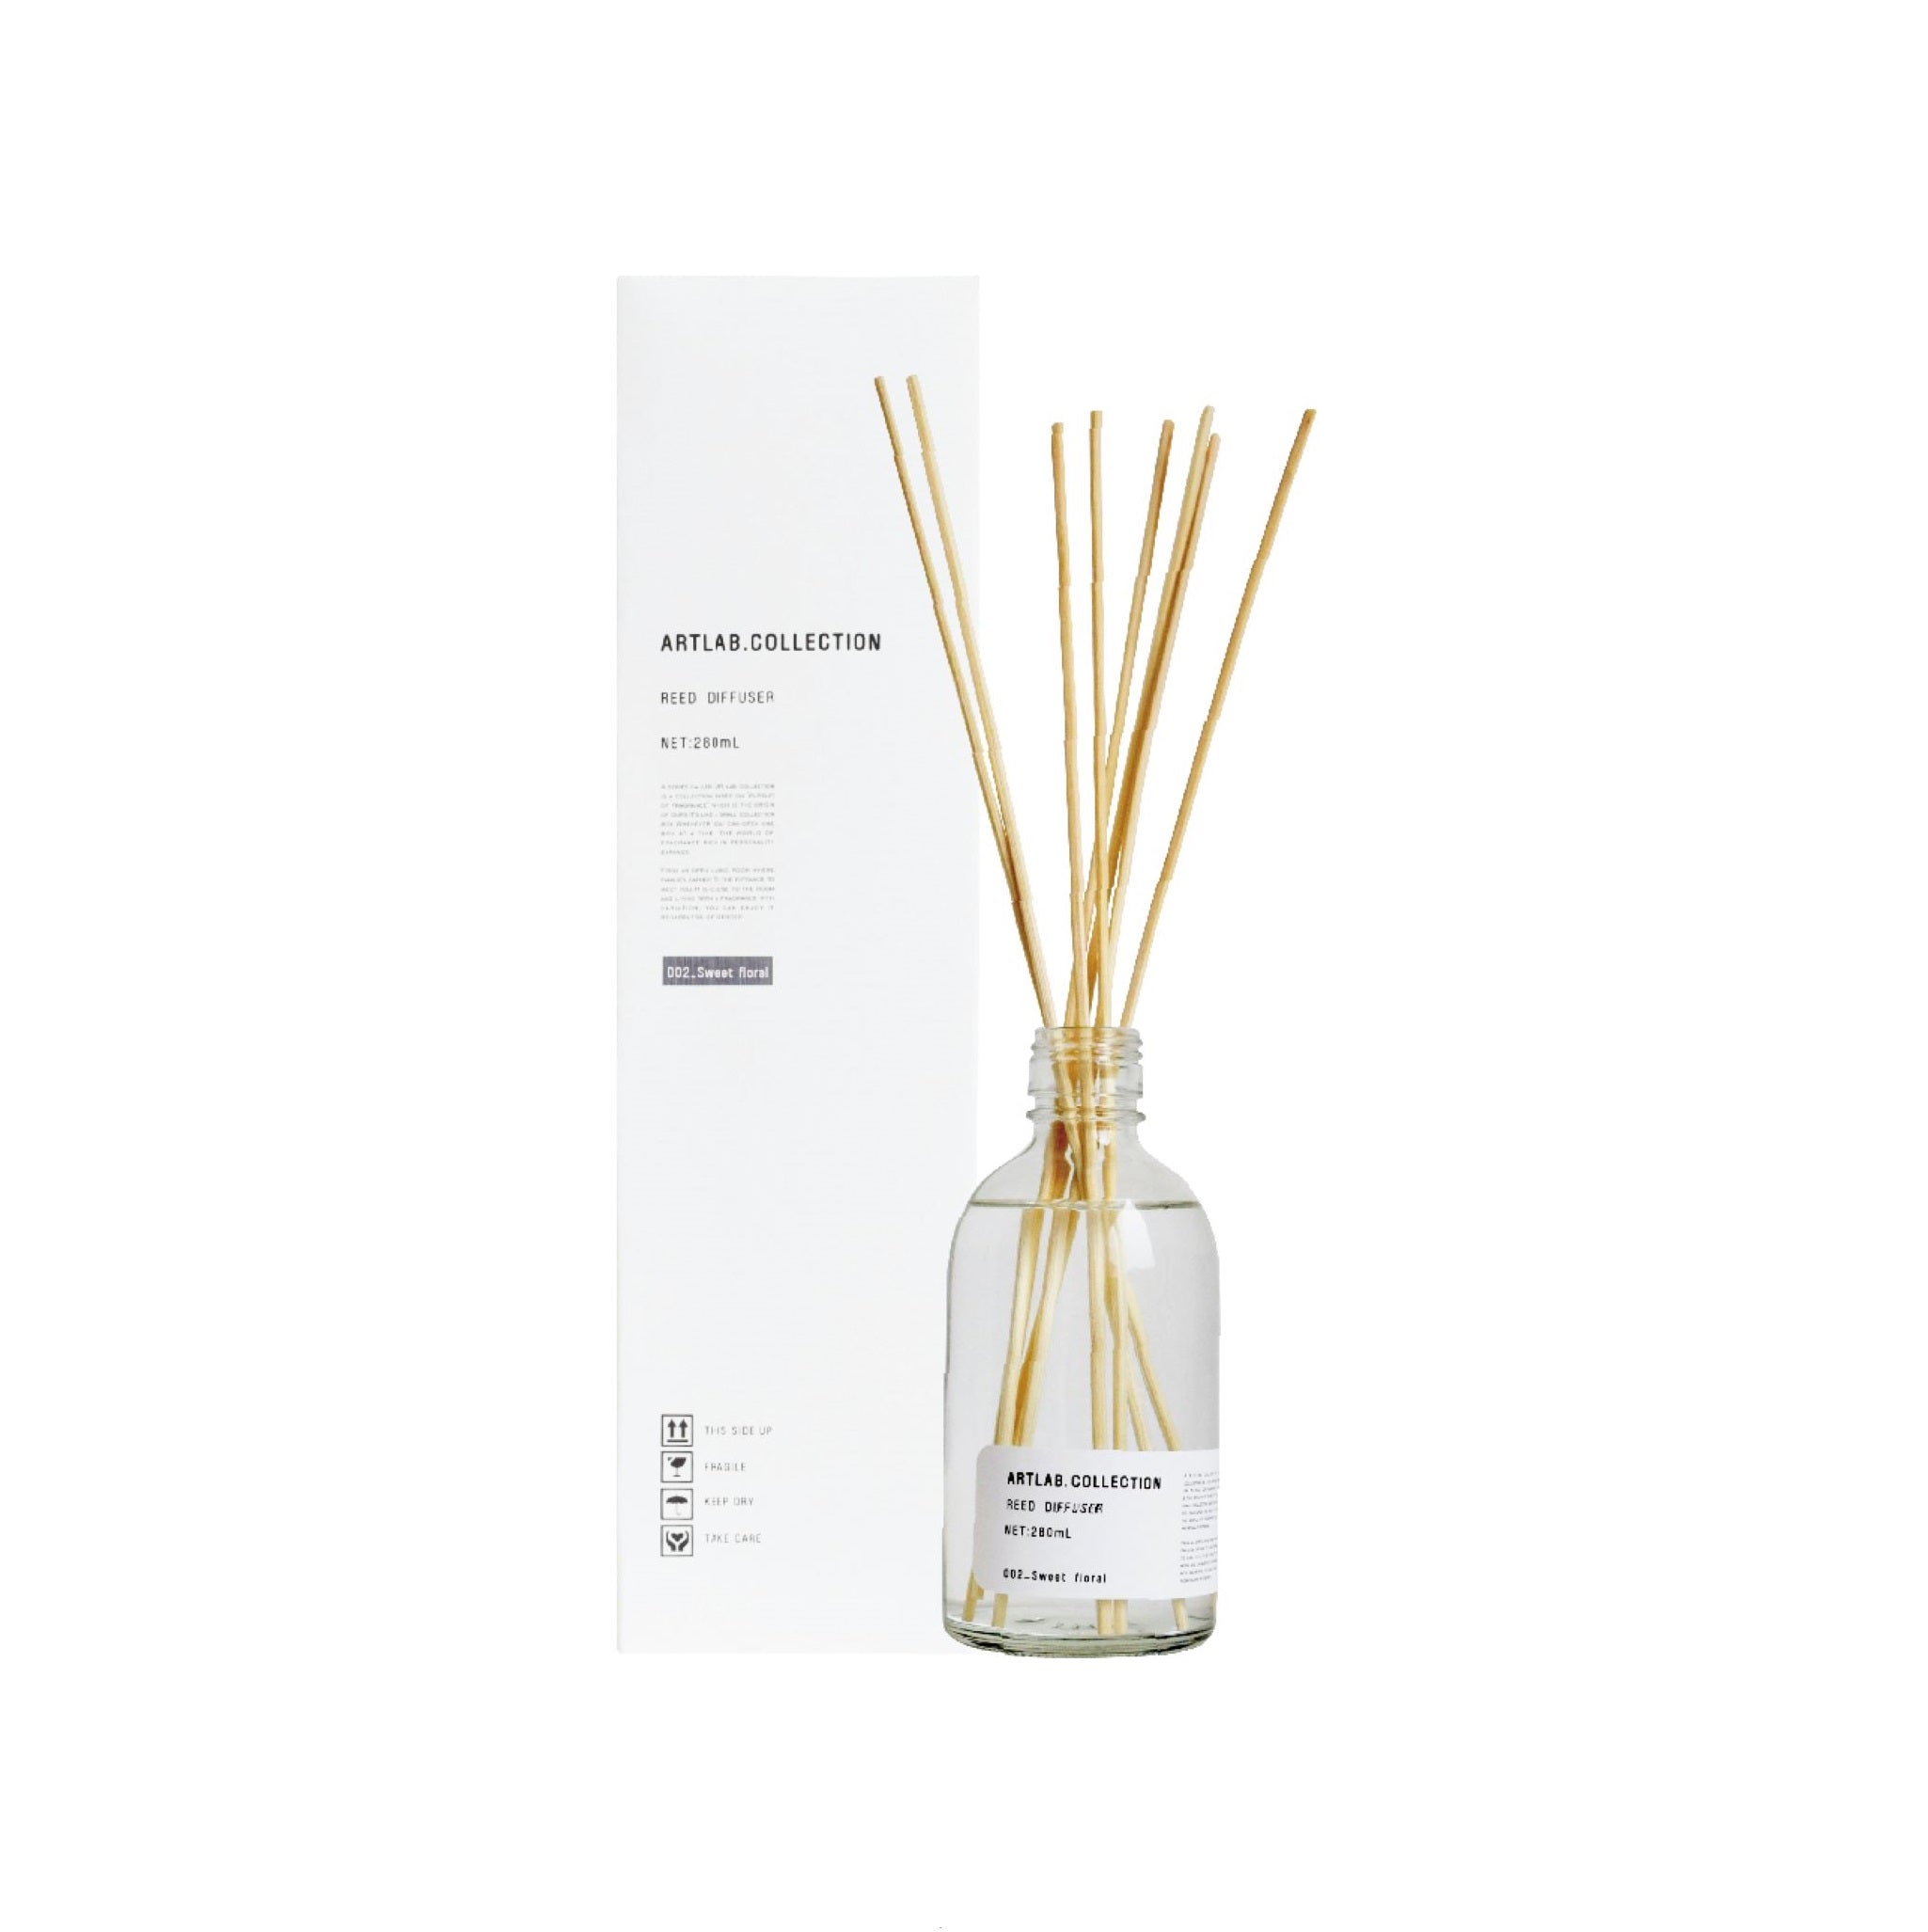 ARTLAB.COLLECTION REED DIFFUSER